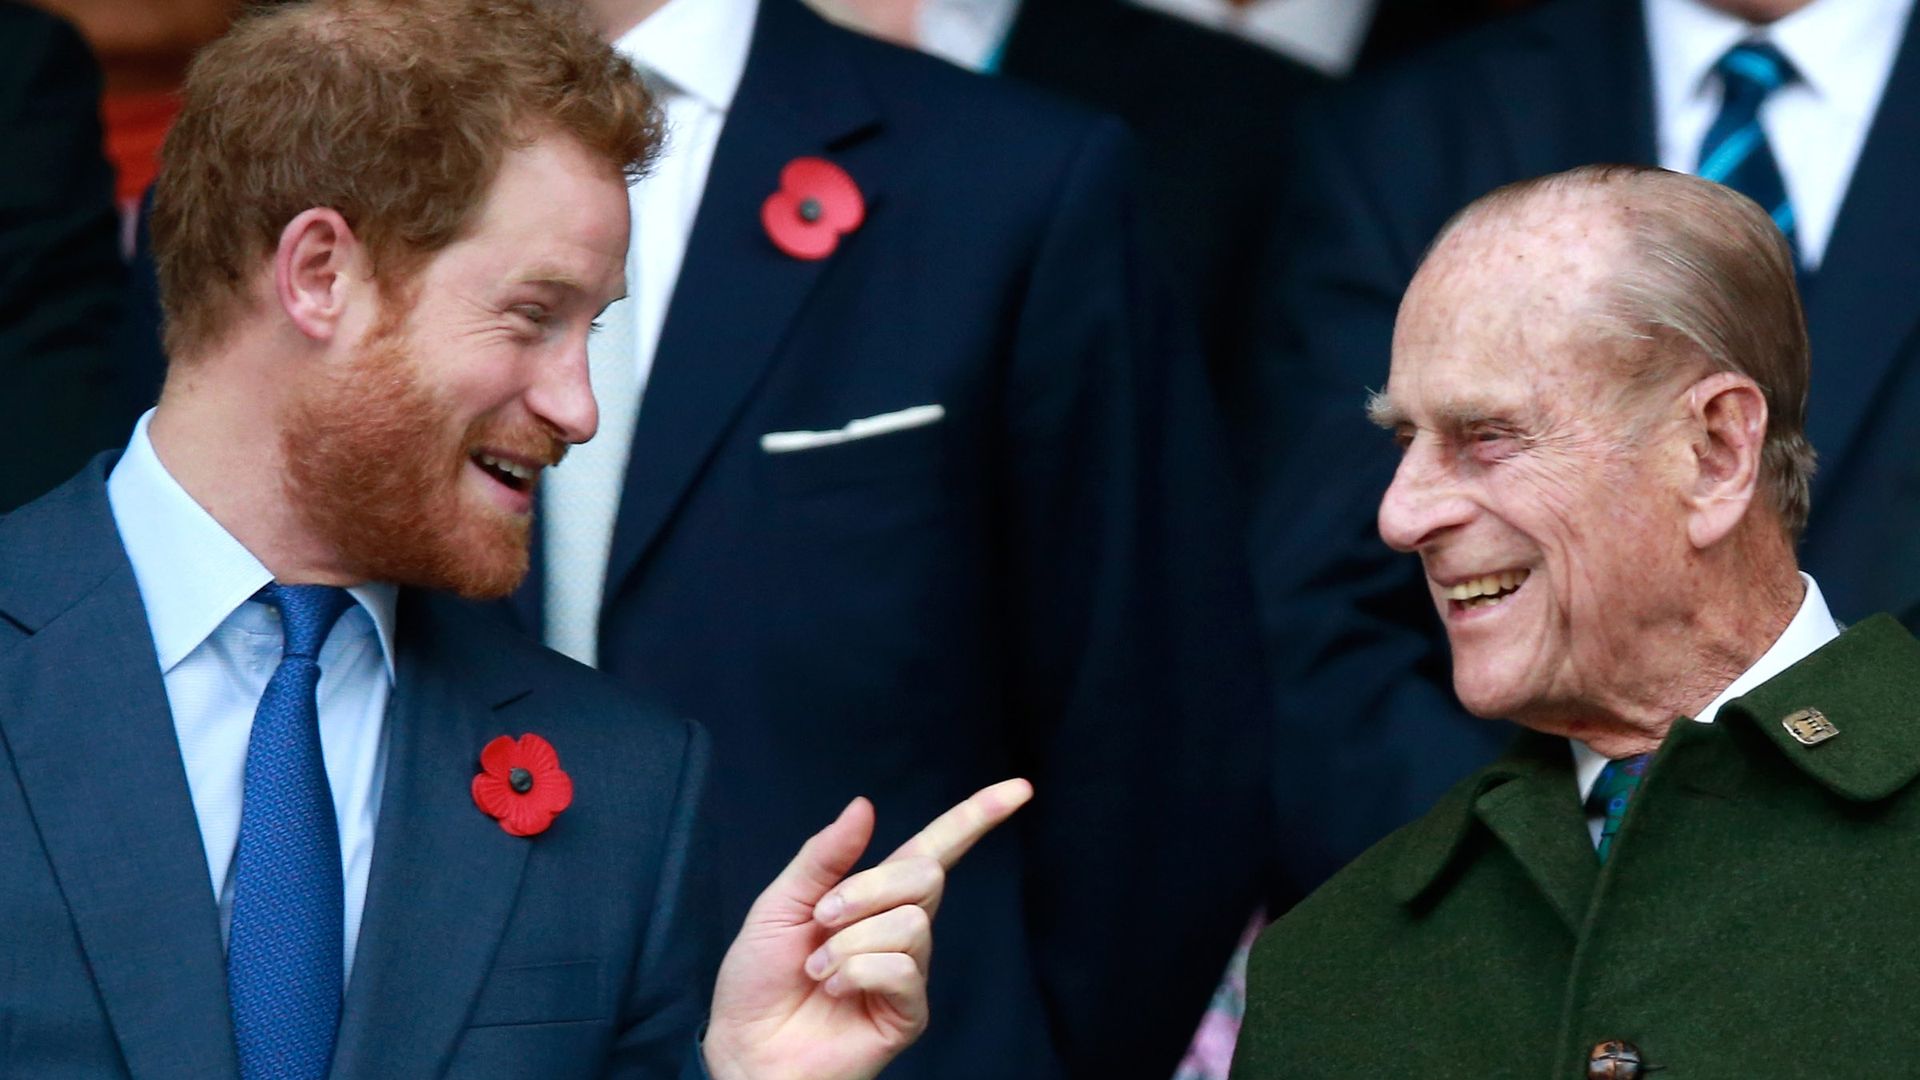 Prince Harry pointing and smiling at Prince Phillip dressed in a green coat